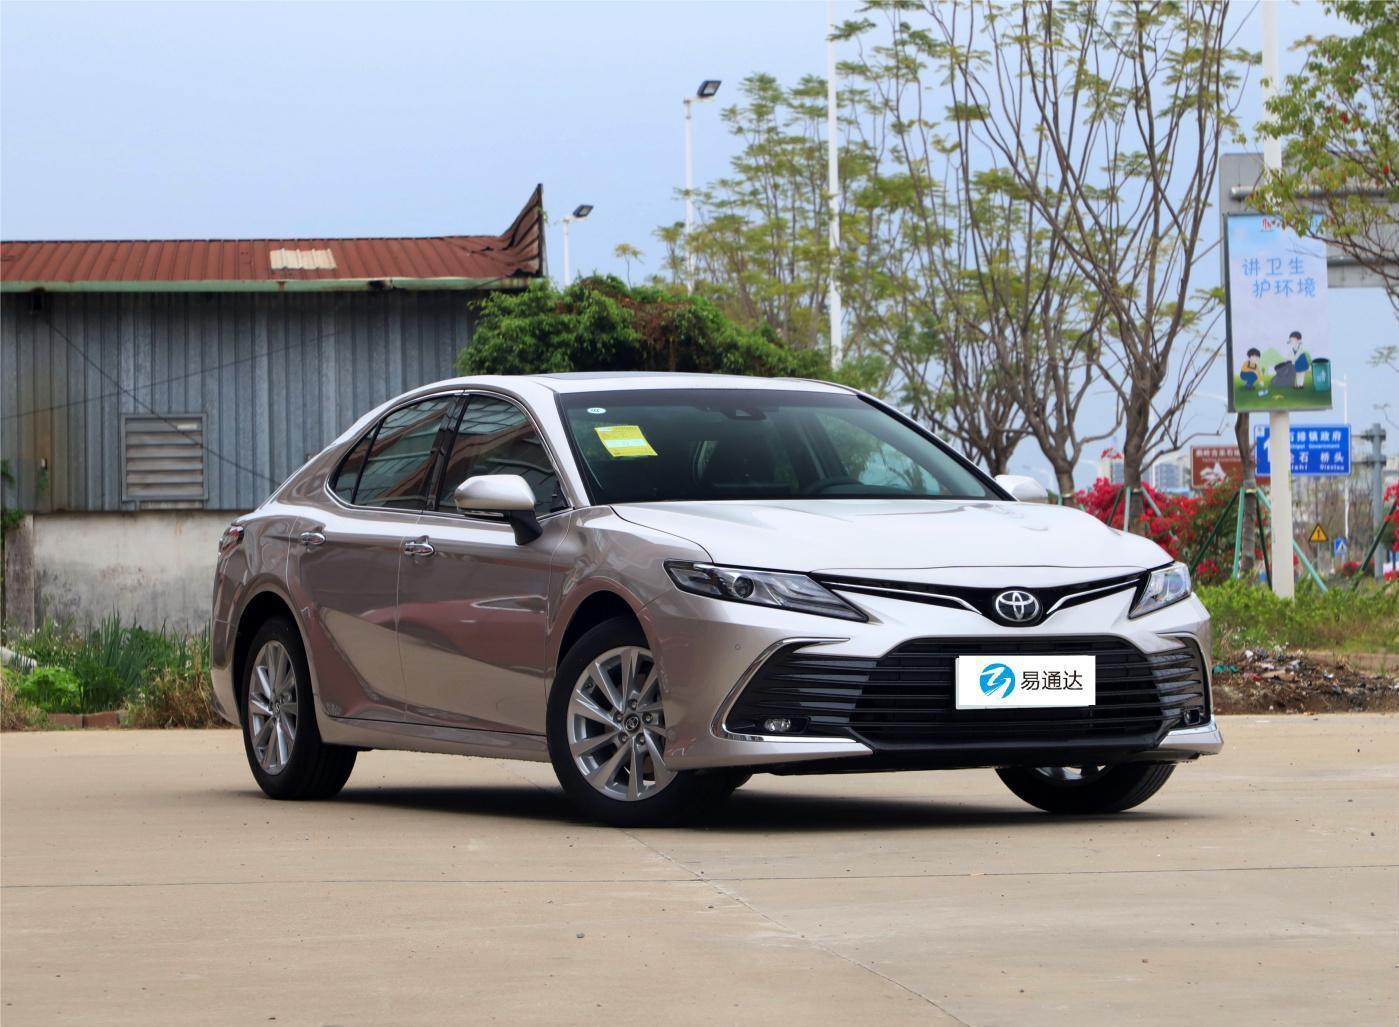 Toyota Camry electric vehicles Headstock